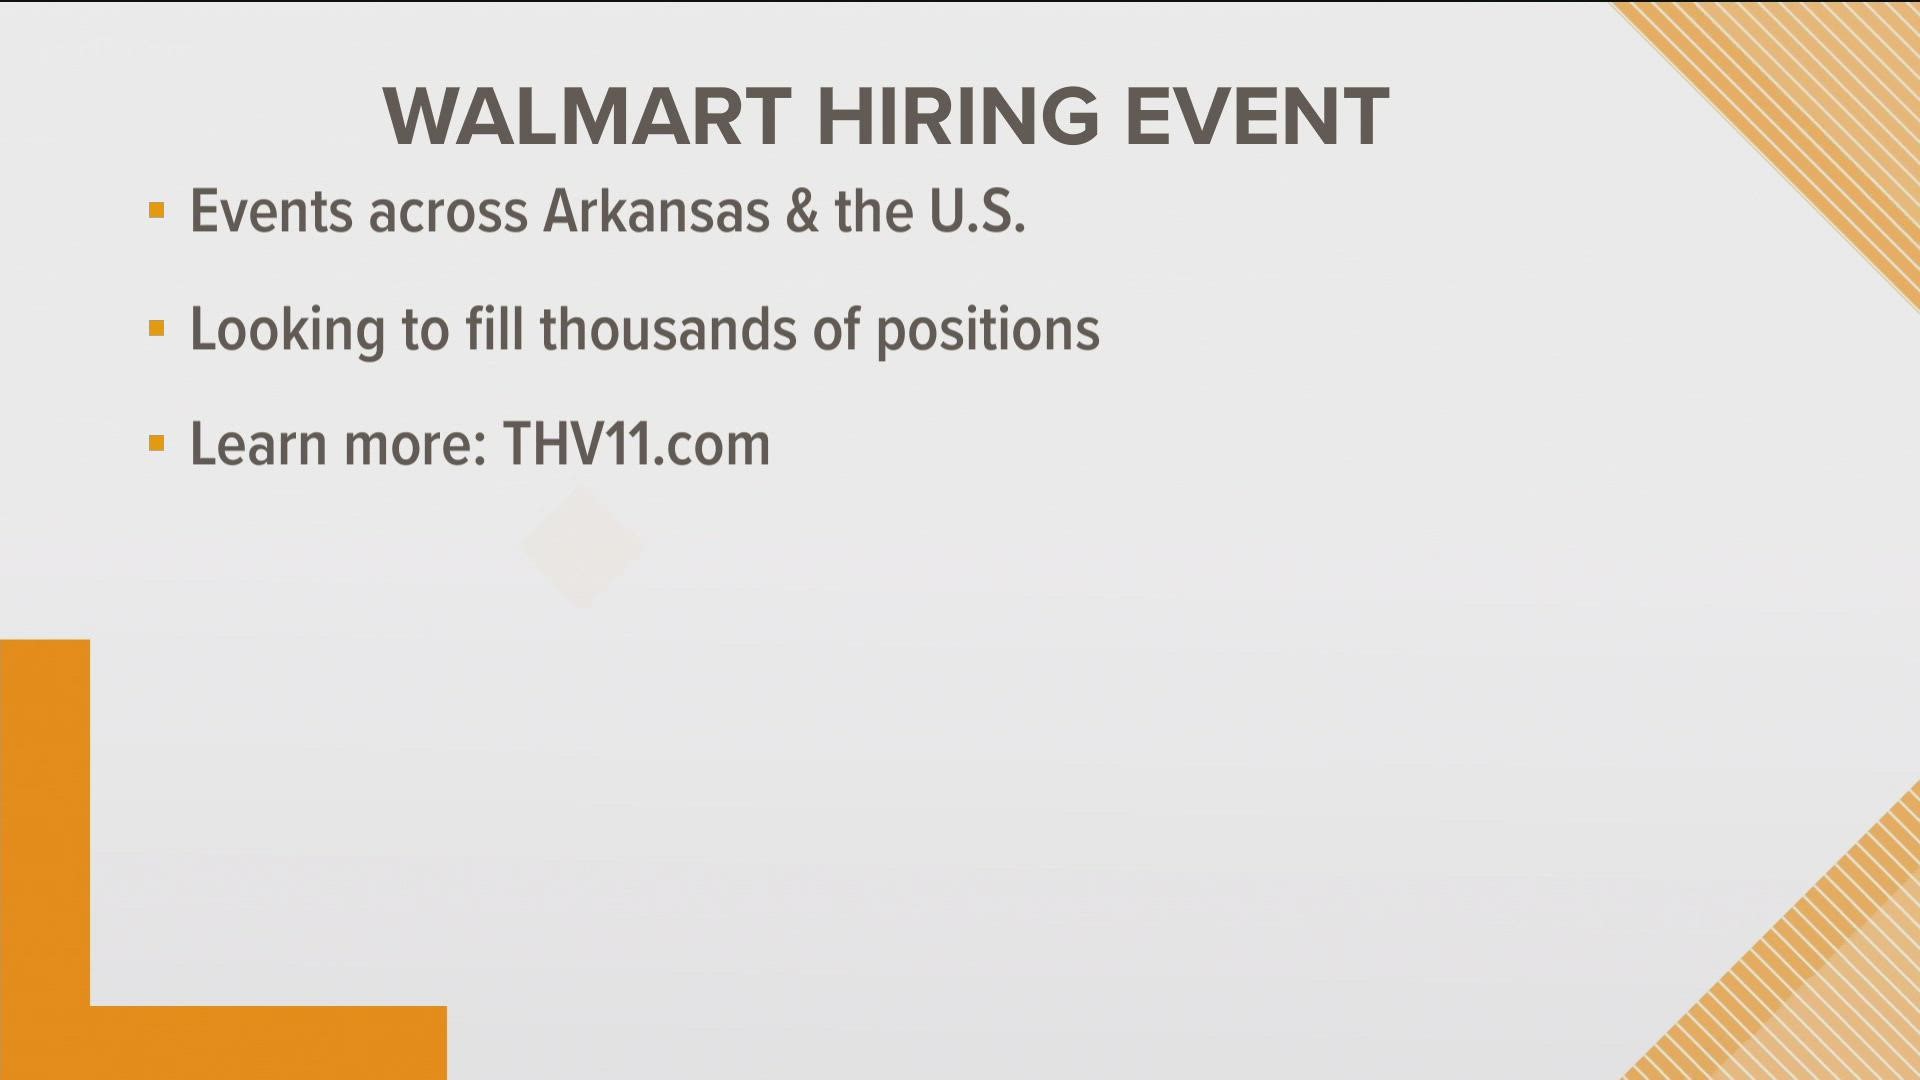 Walmart and Dillard's are planning to hire hundreds of seasonal employees.